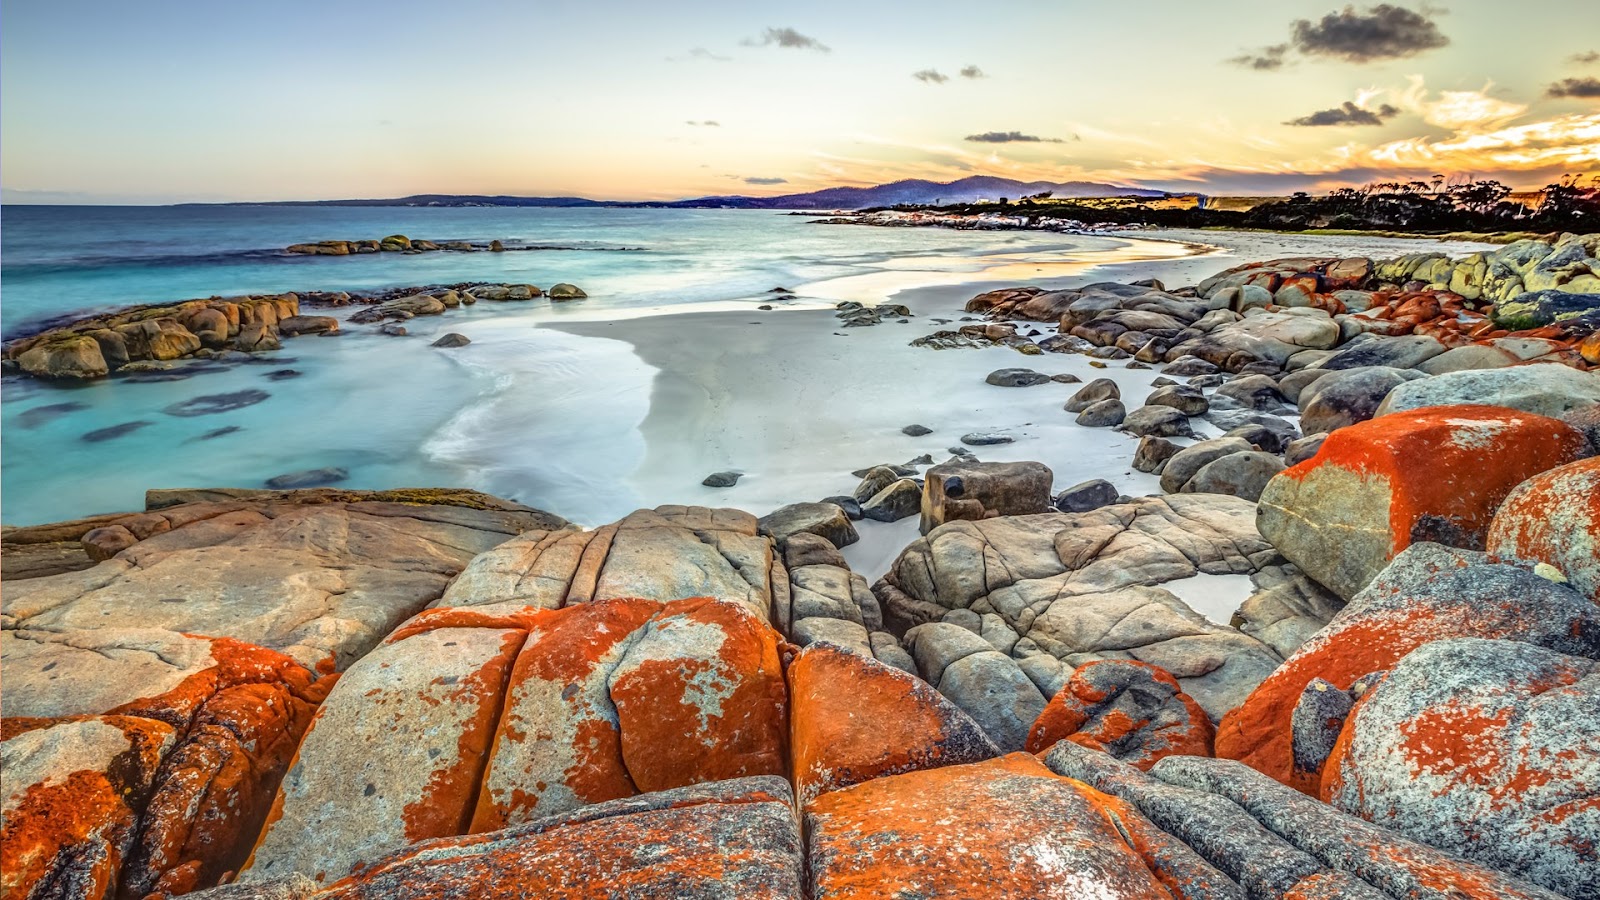 The orange-tinged boulders constrasted against the blue waters in the stunning Bay of Fires